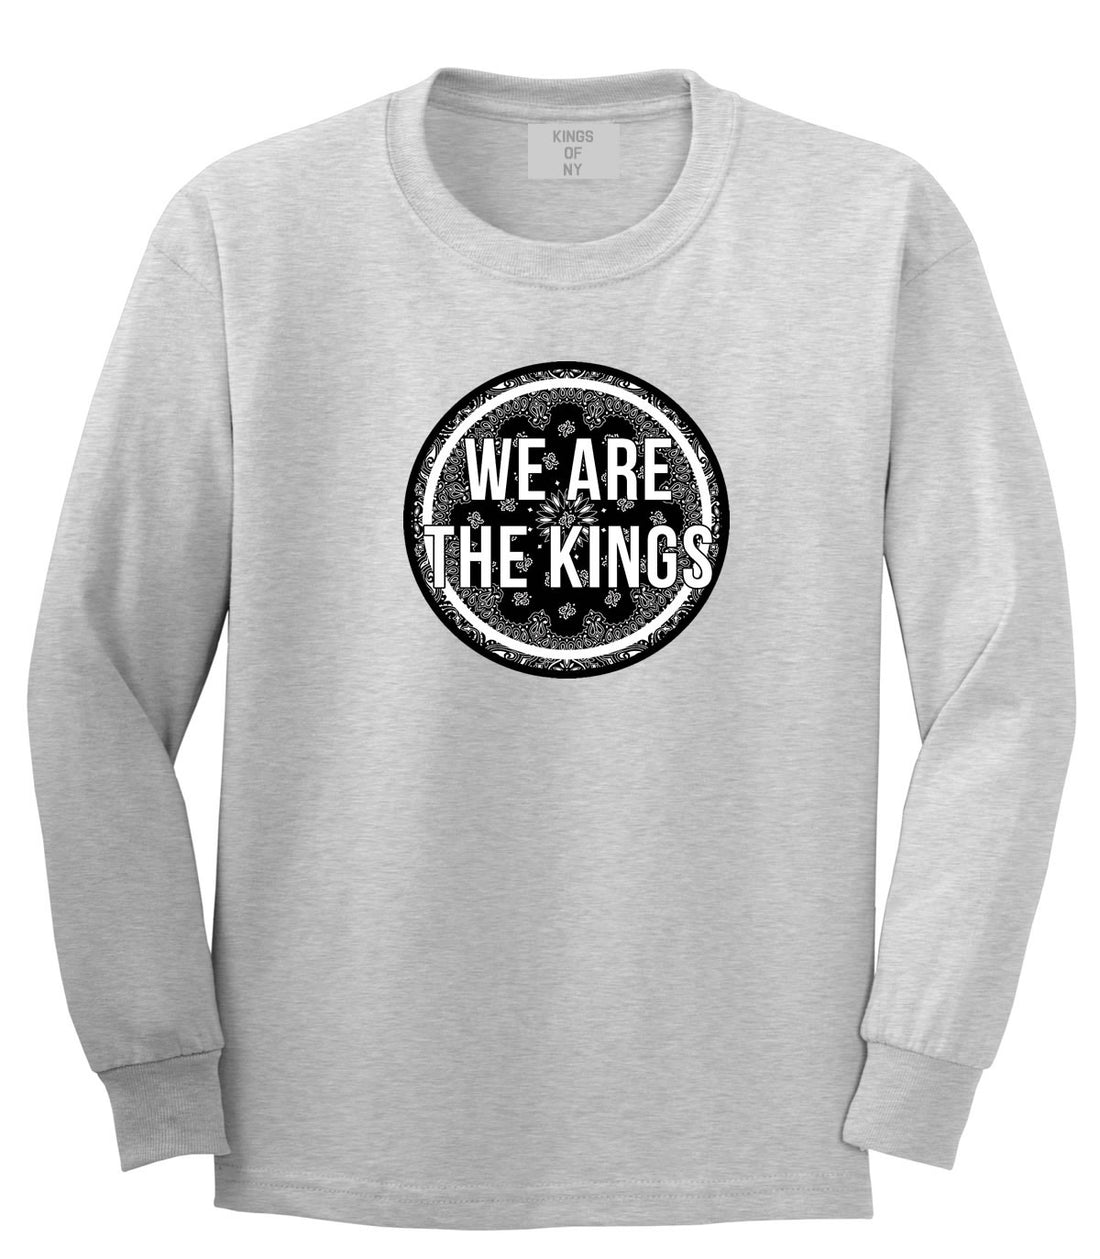 Kings Of NY We Are The Kings Long Sleeve T-Shirt in Grey